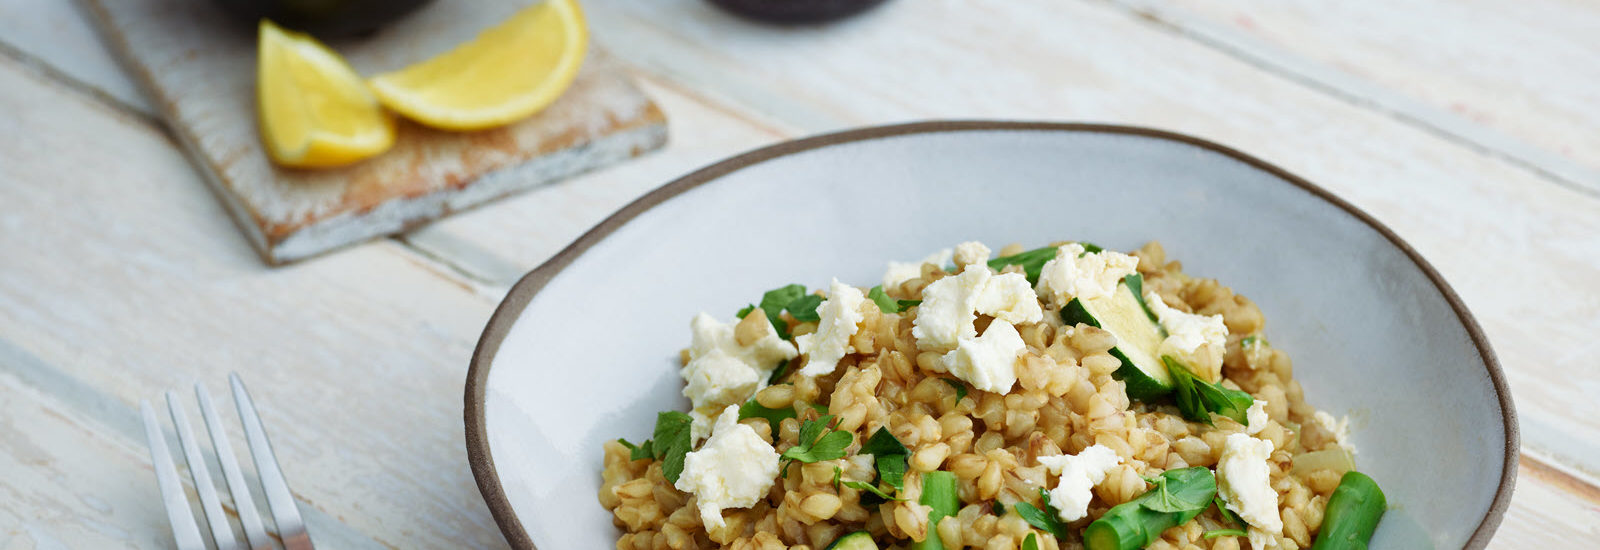 Barley Risotto with Spring Vegetables